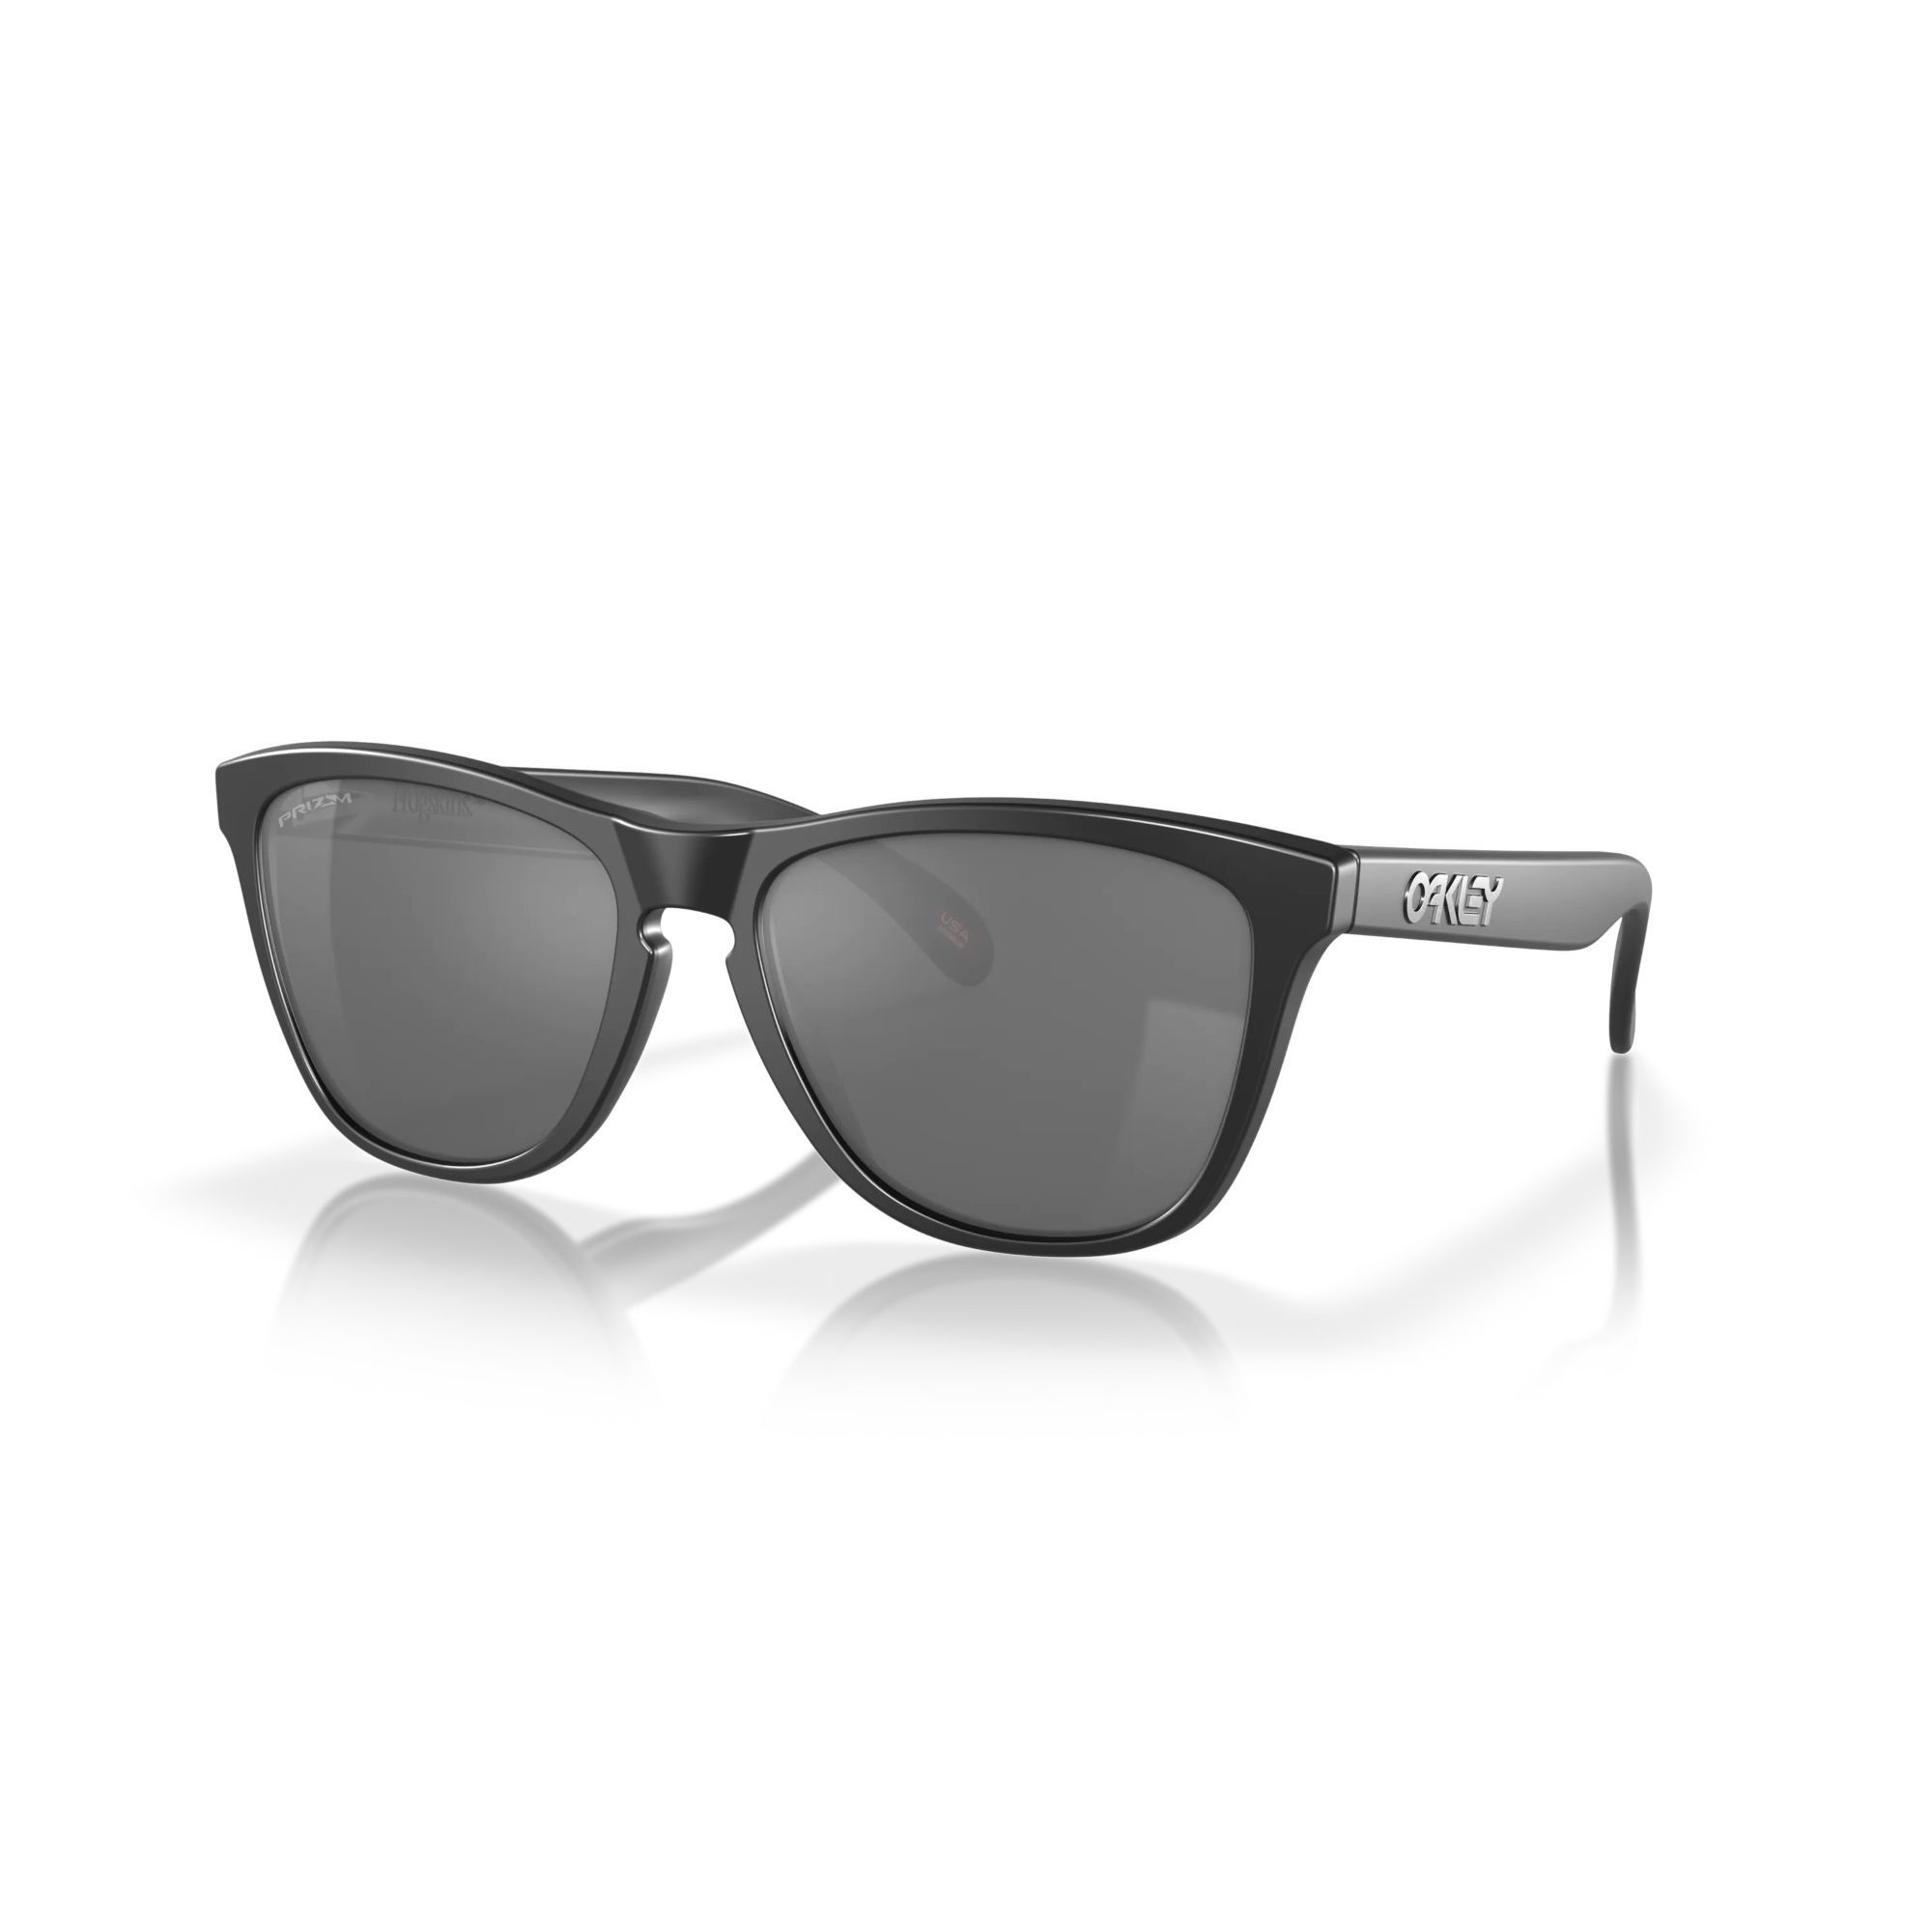 Frogskins Sunglasses OO9013-F7 size 55